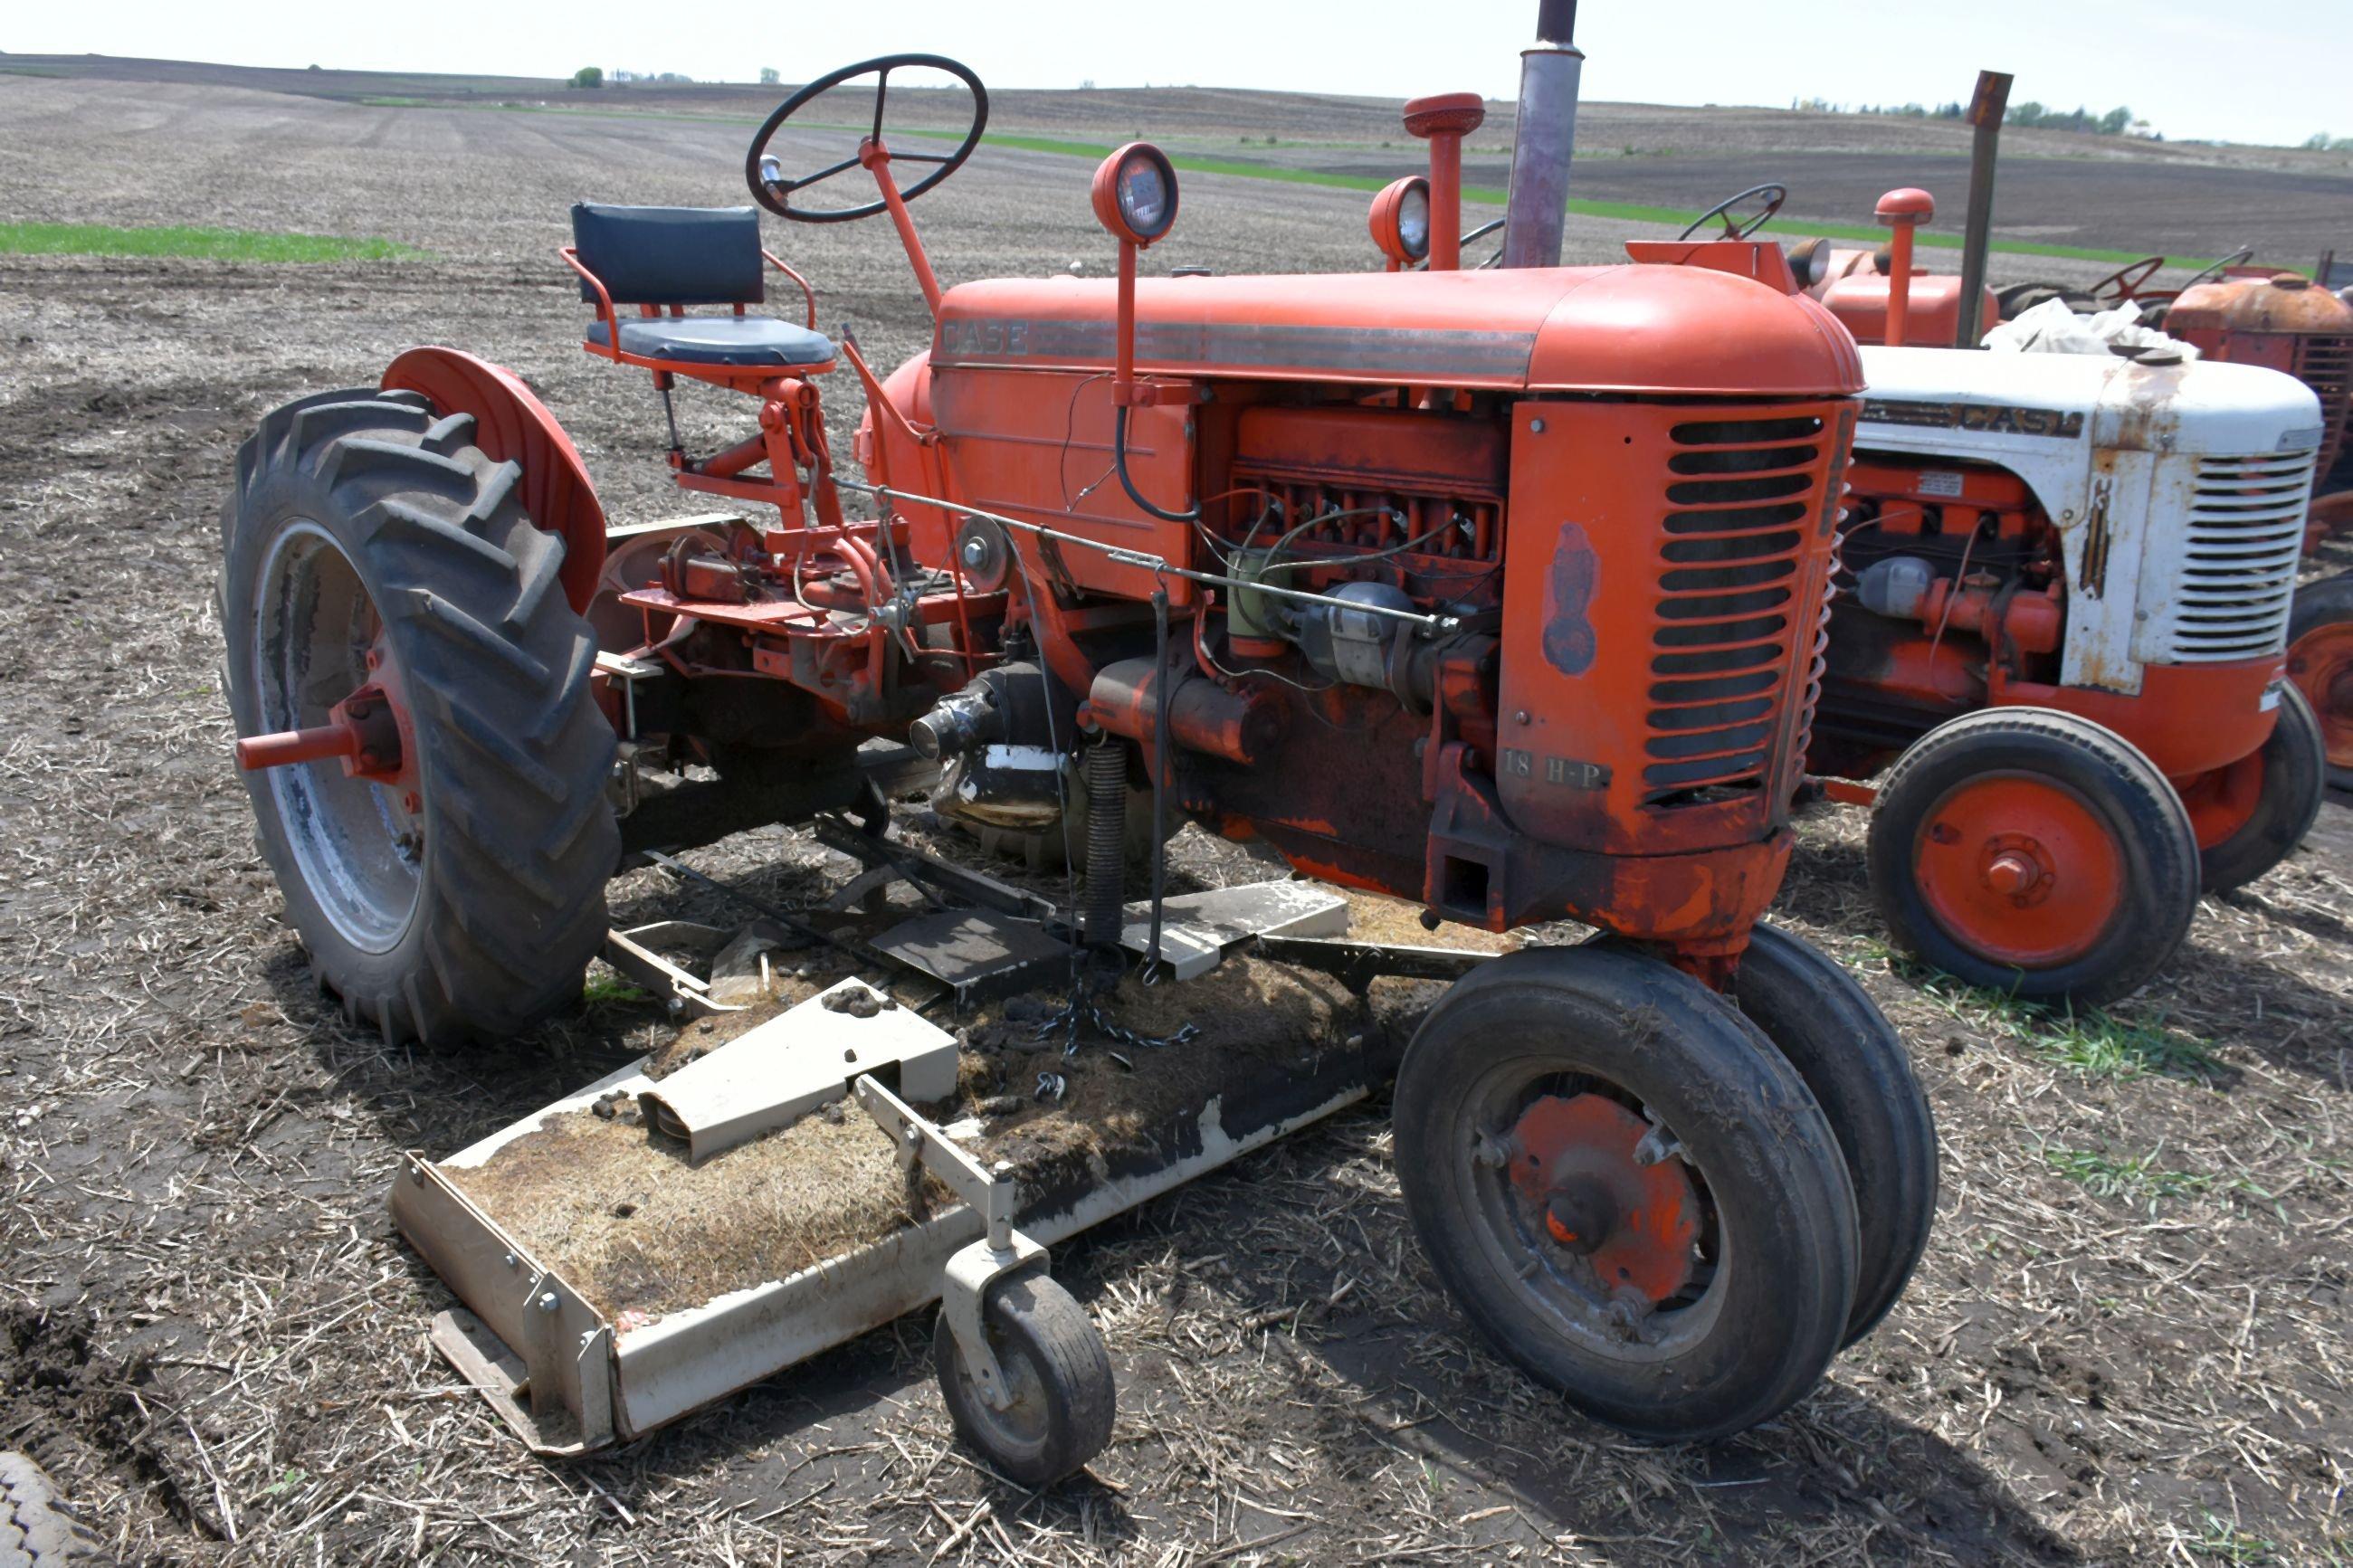 1951 Case VAC Tractor, Narrow Front, Runs, Fenders, With A Woods L306 Belly Mower, SN: 5564080